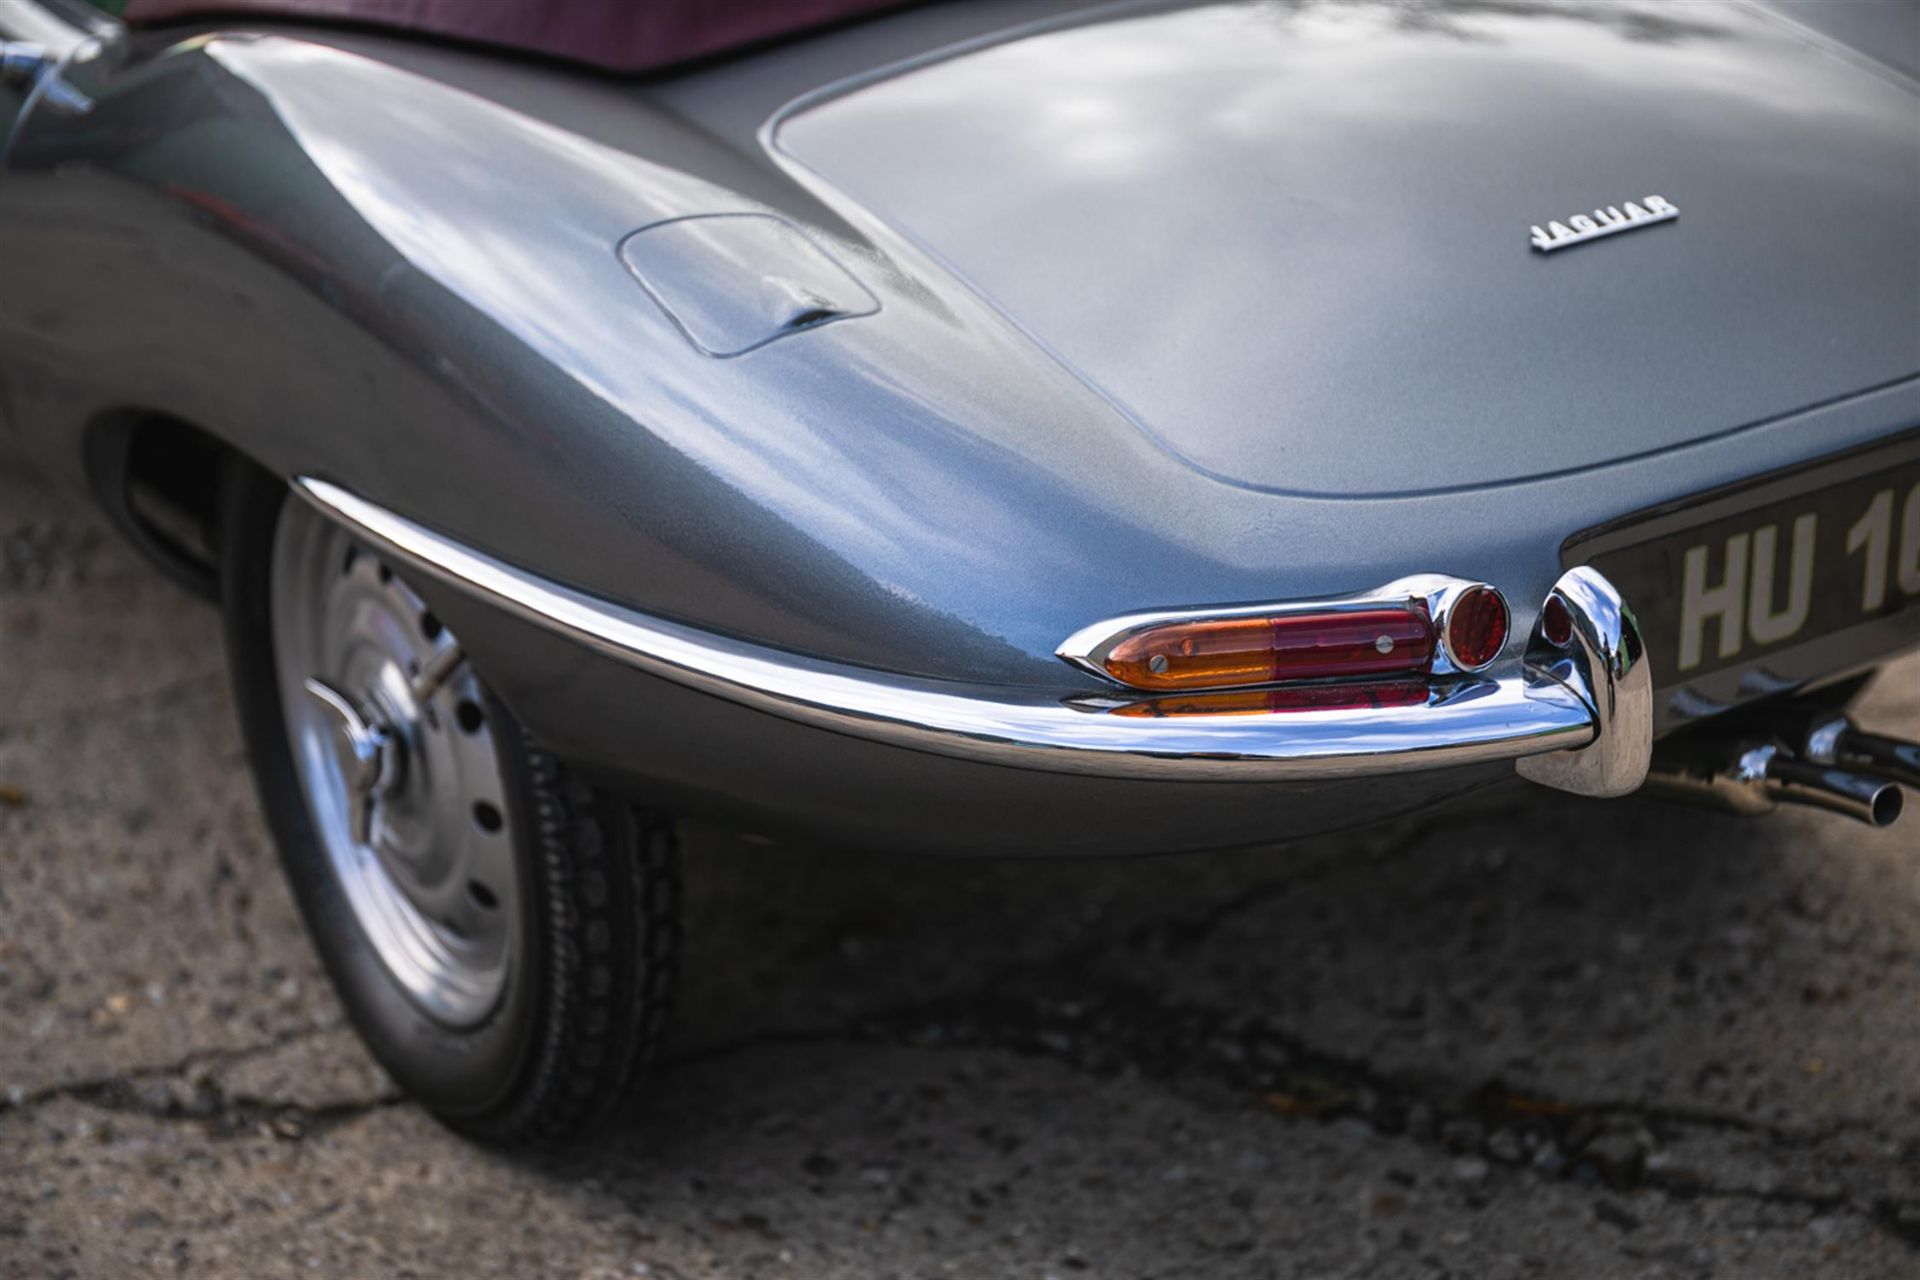 **Regretfully Withdrawn** Stunningly Detailed 1:2.5 Scale Electric Model 'Jaguar' E-Type Series 1 - Image 10 of 10